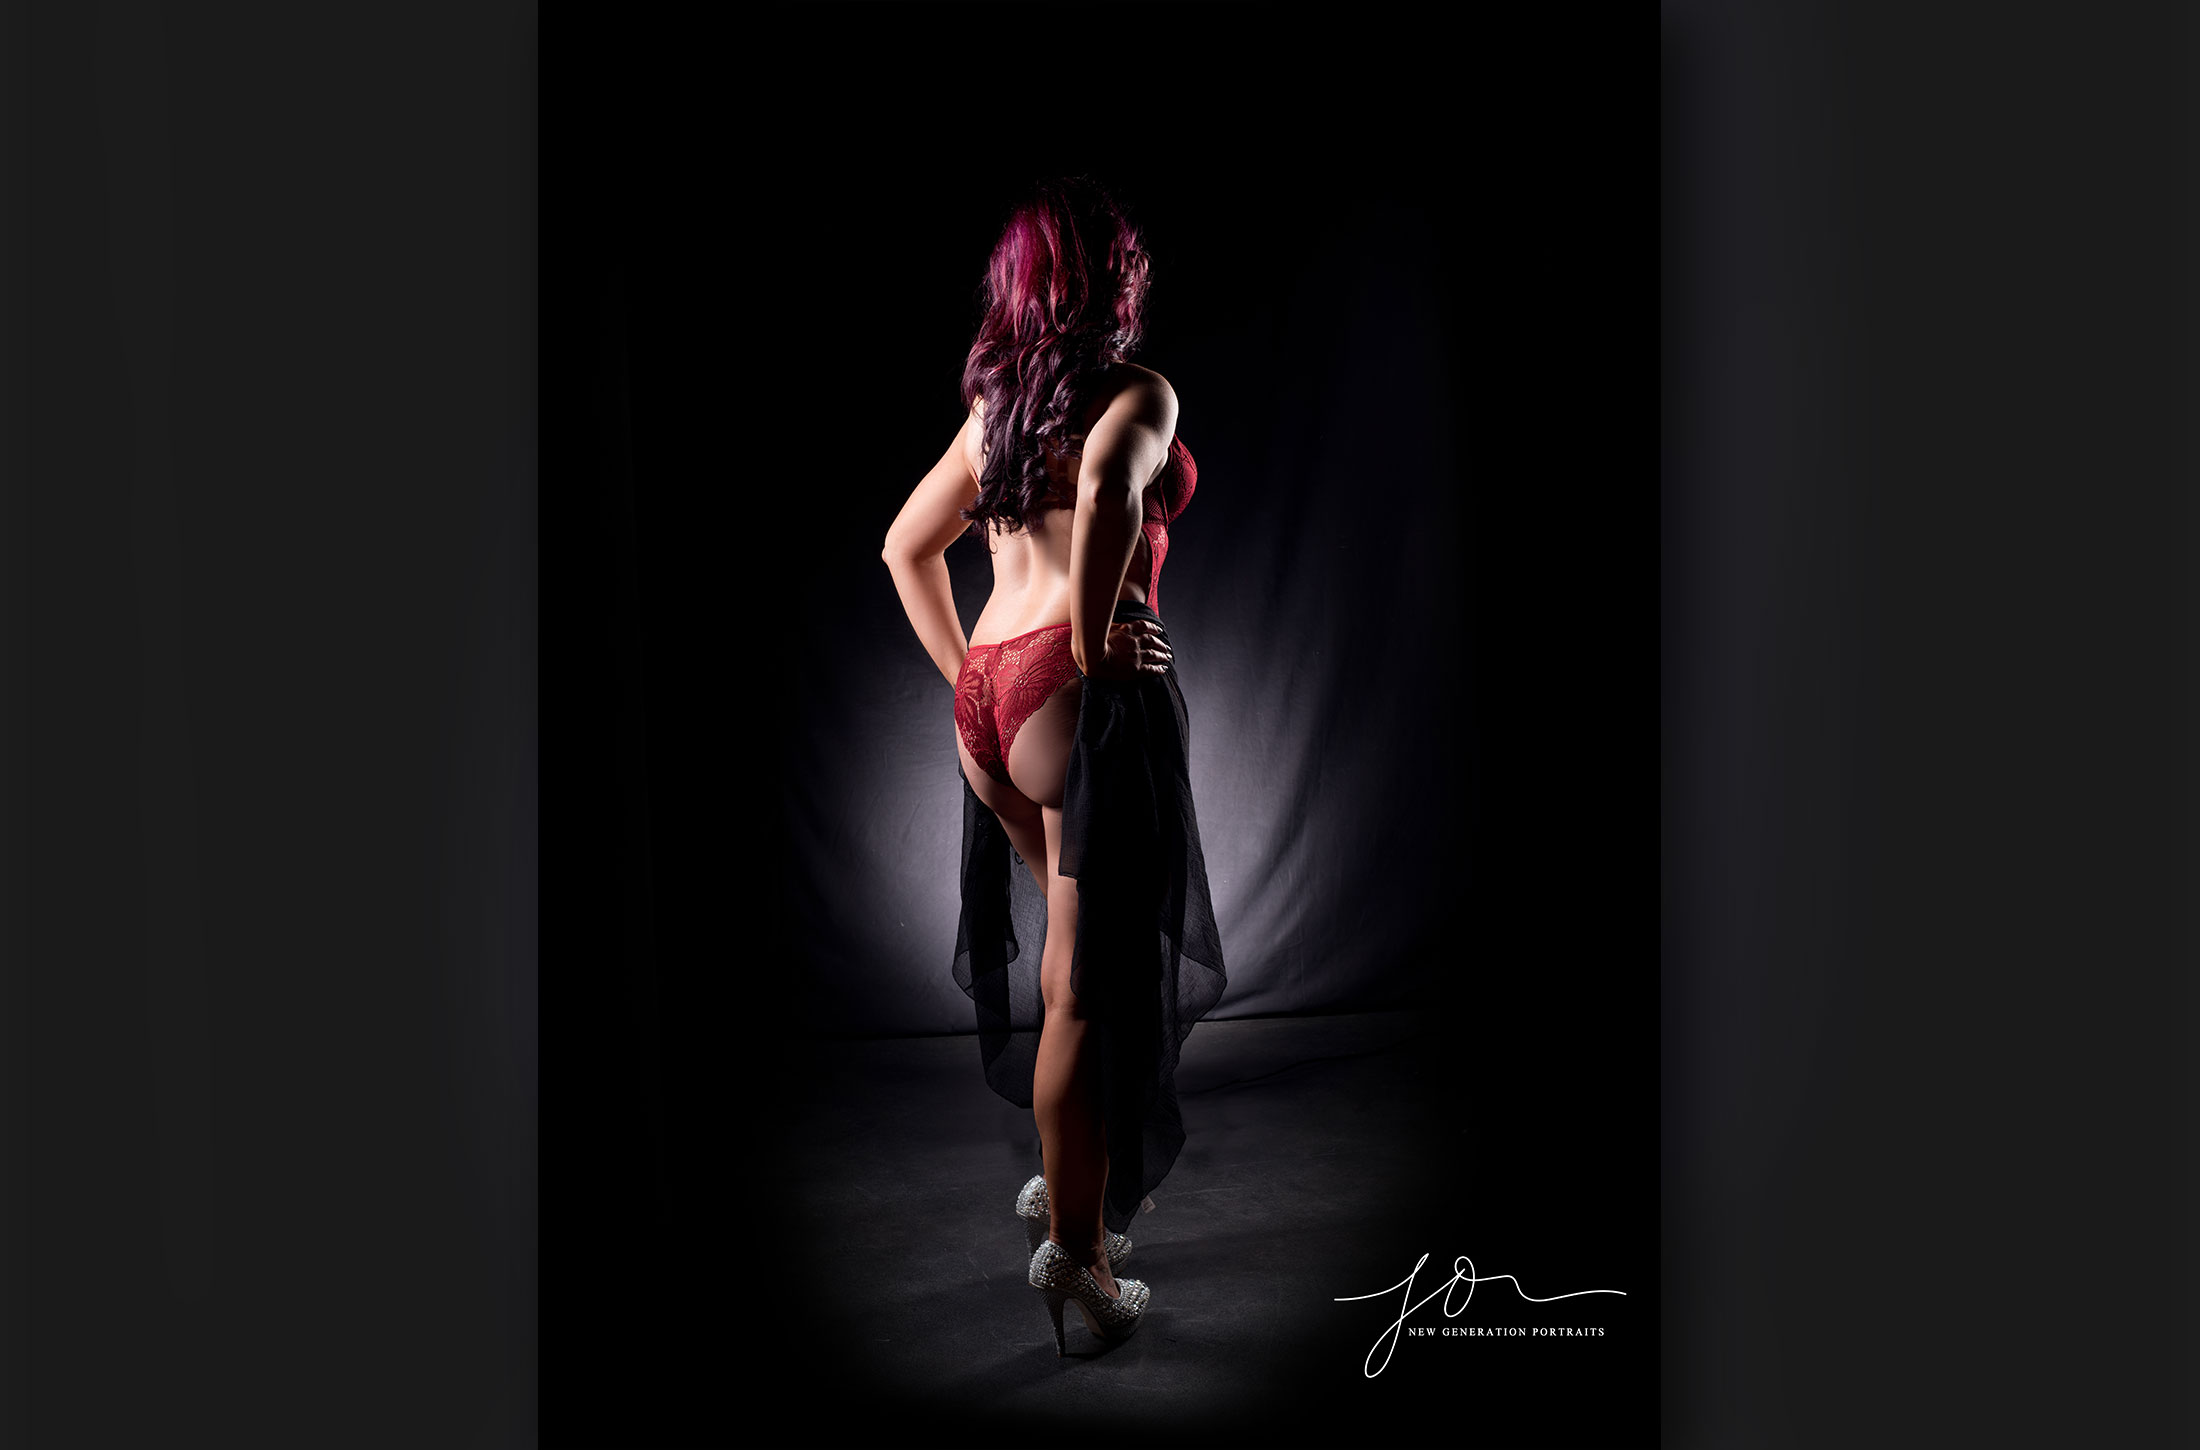 Boudoir portraits on our black background. Captured by New Generation Portraits